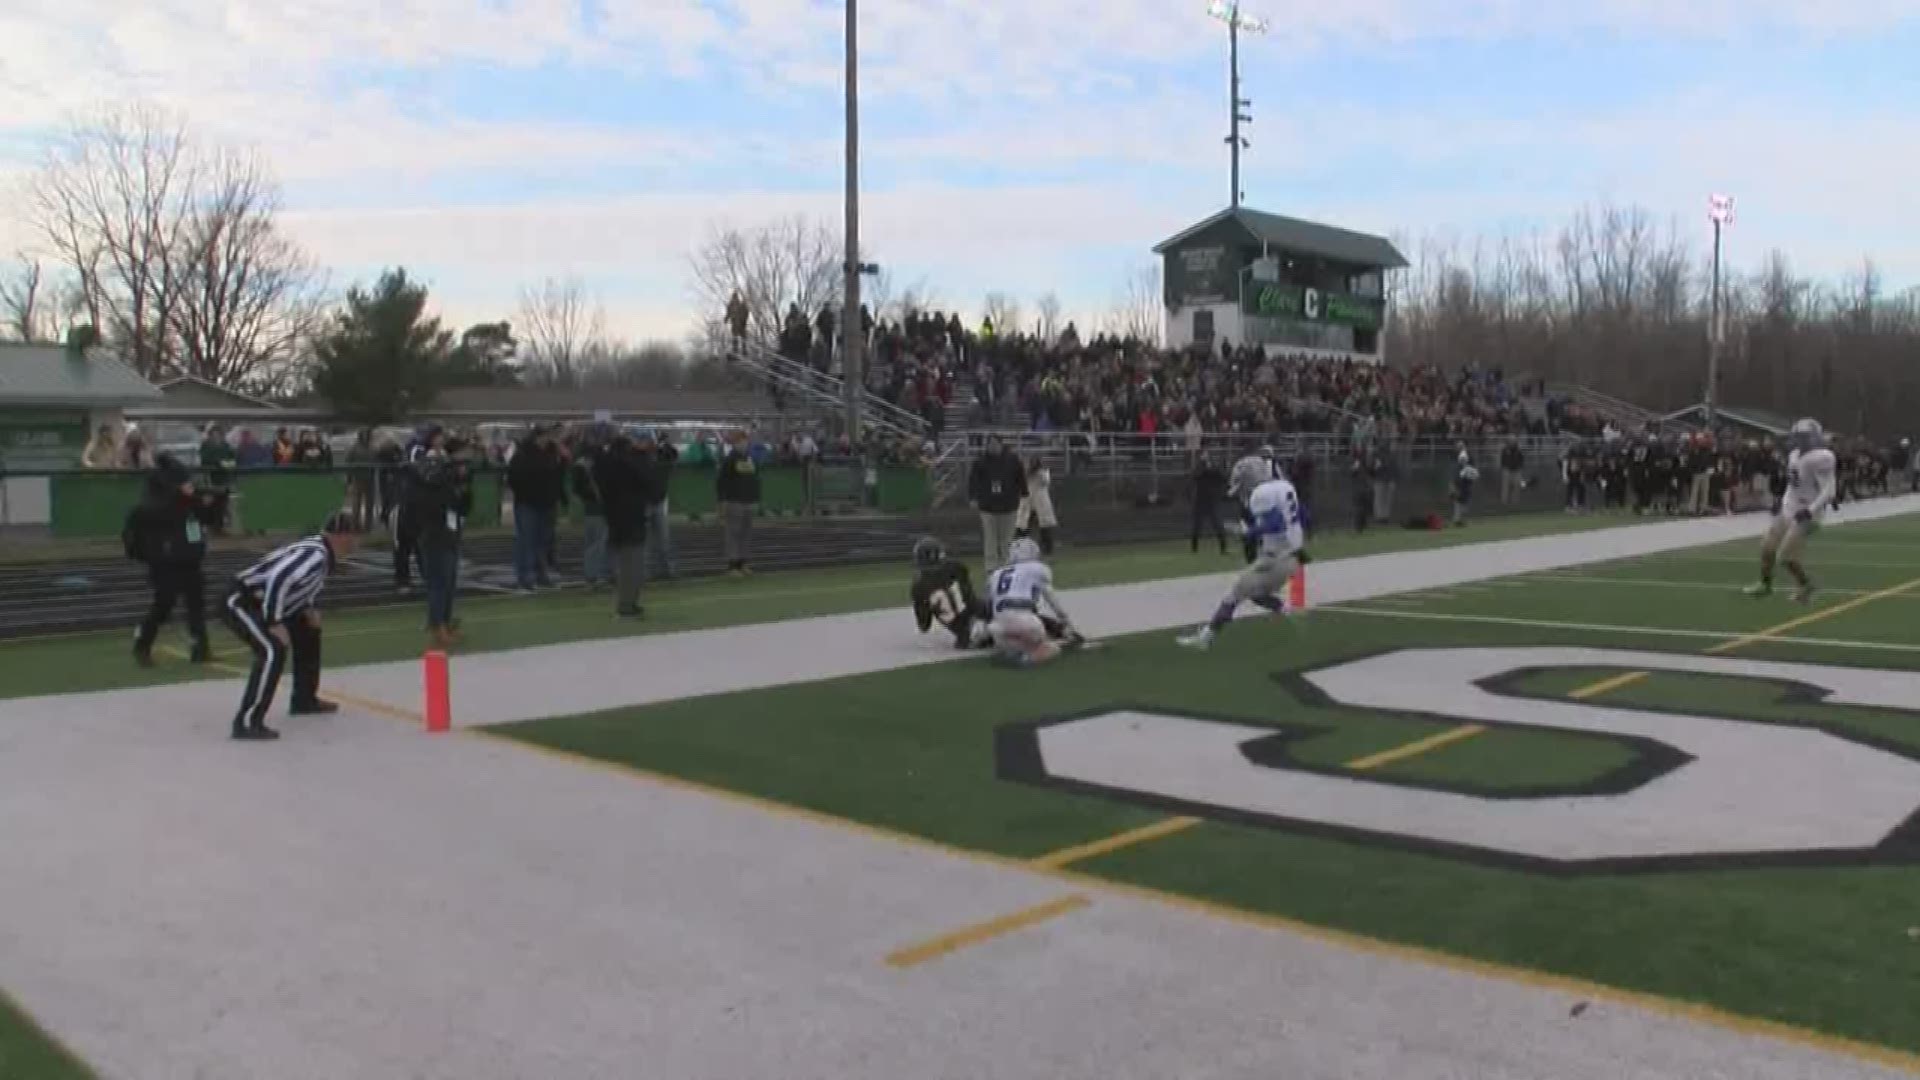 :Montague's season came to an end after they lost in overtime to Maple City Glen Lake, 31-30.